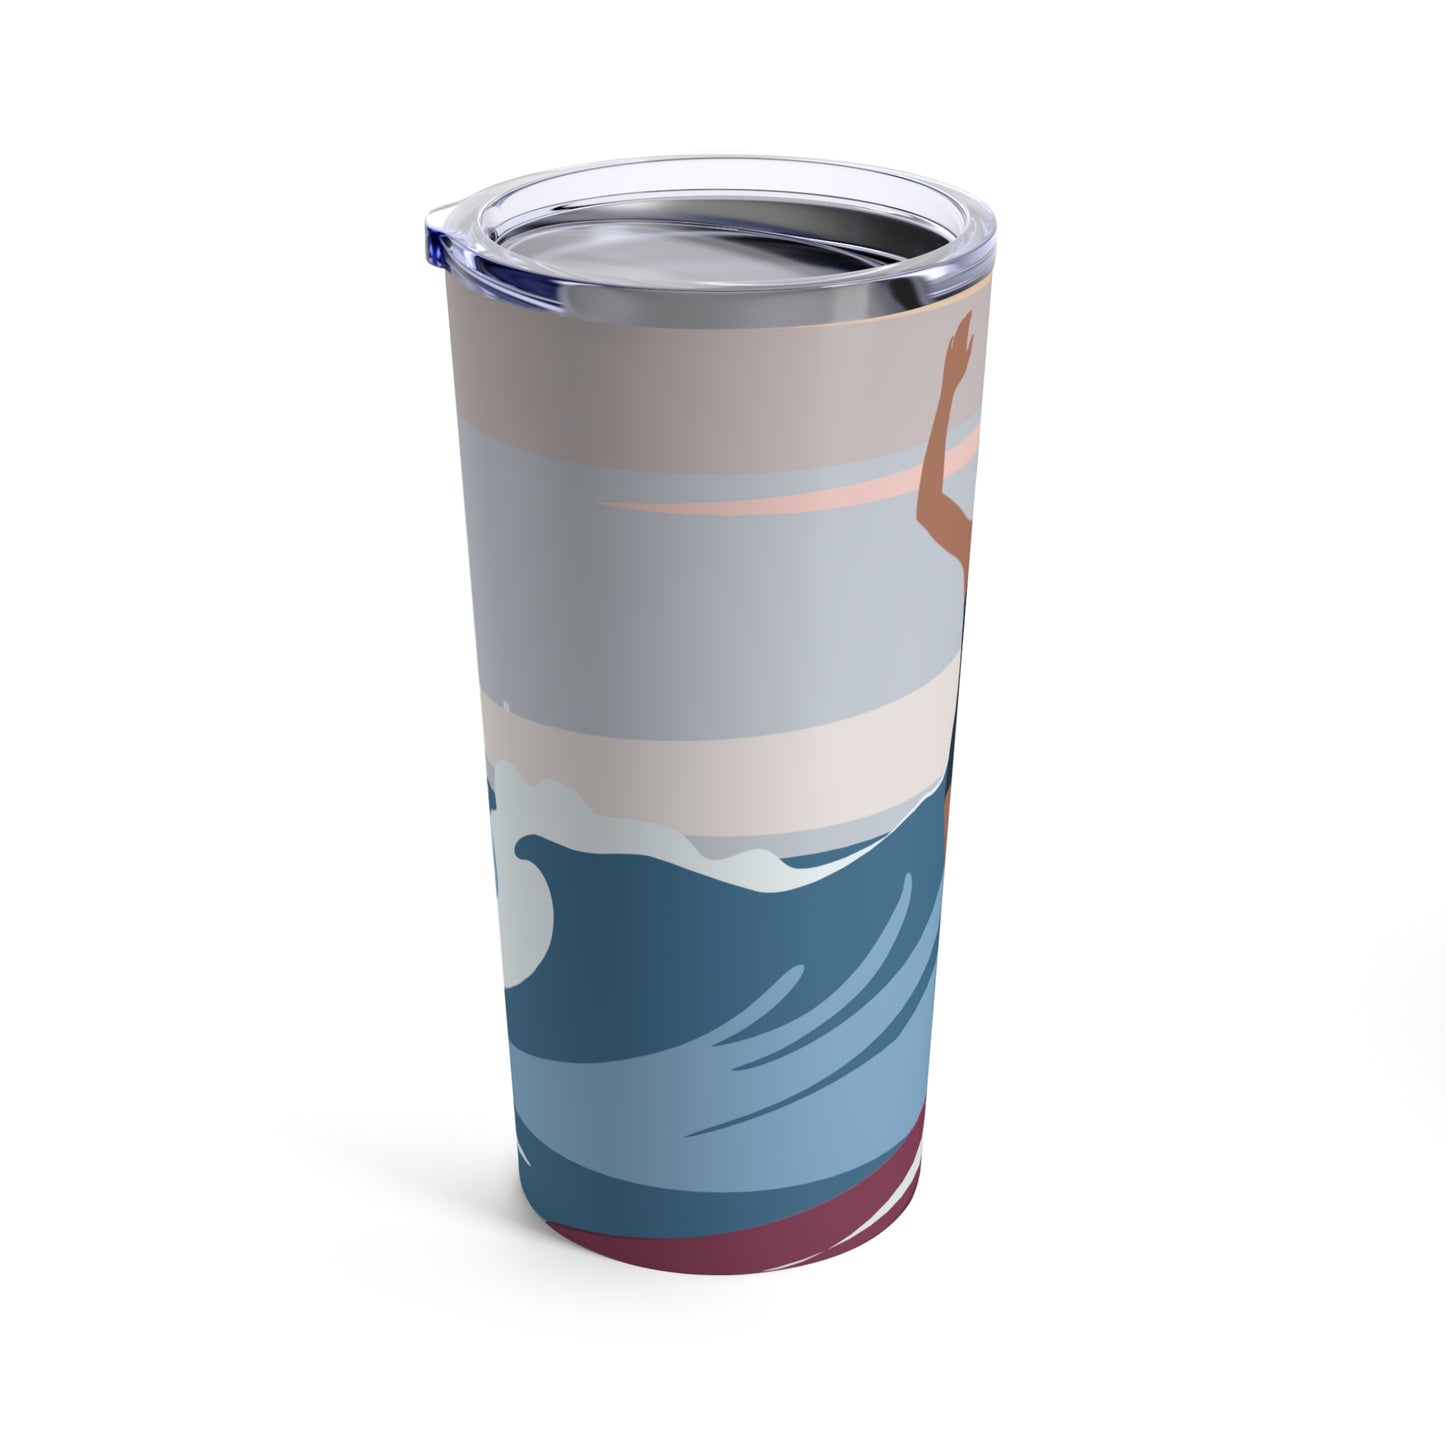 Serenity by the Sea Woman Surfing Art Stainless Steel Hot or Cold Vacuum Tumbler 20oz